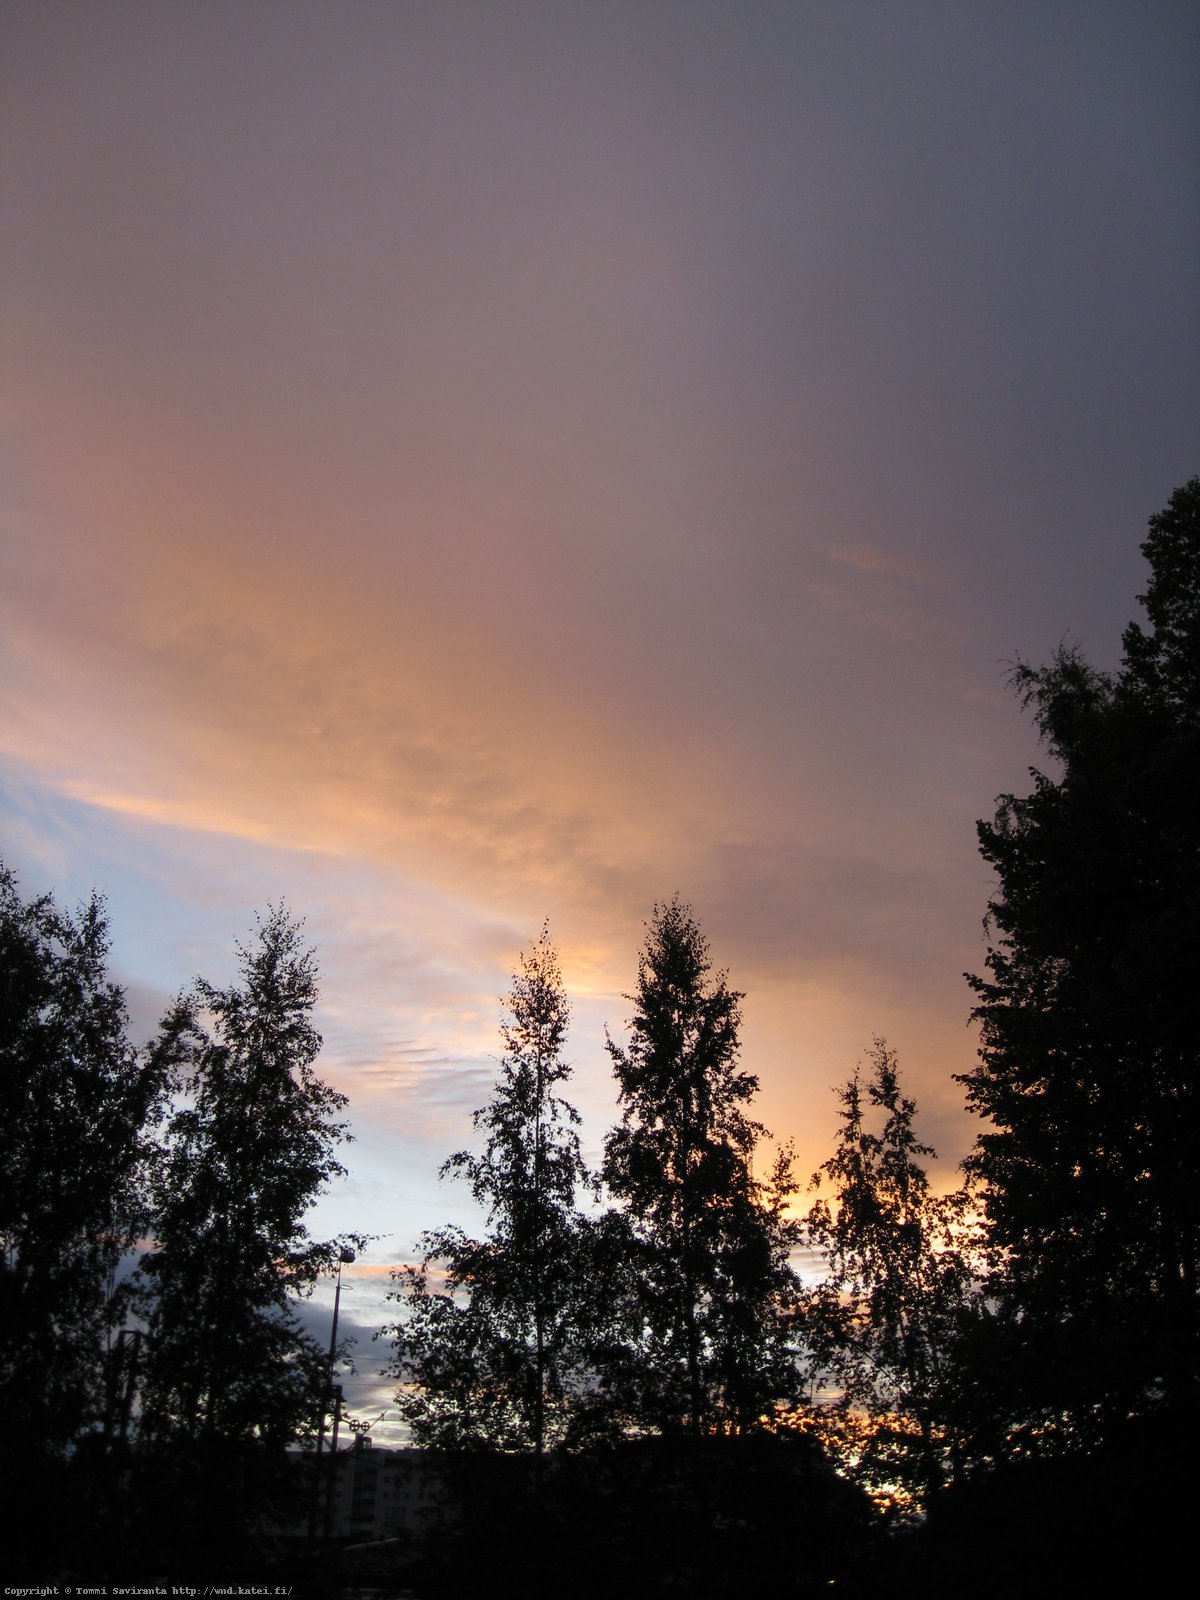 Day #1: Early morning in Finland